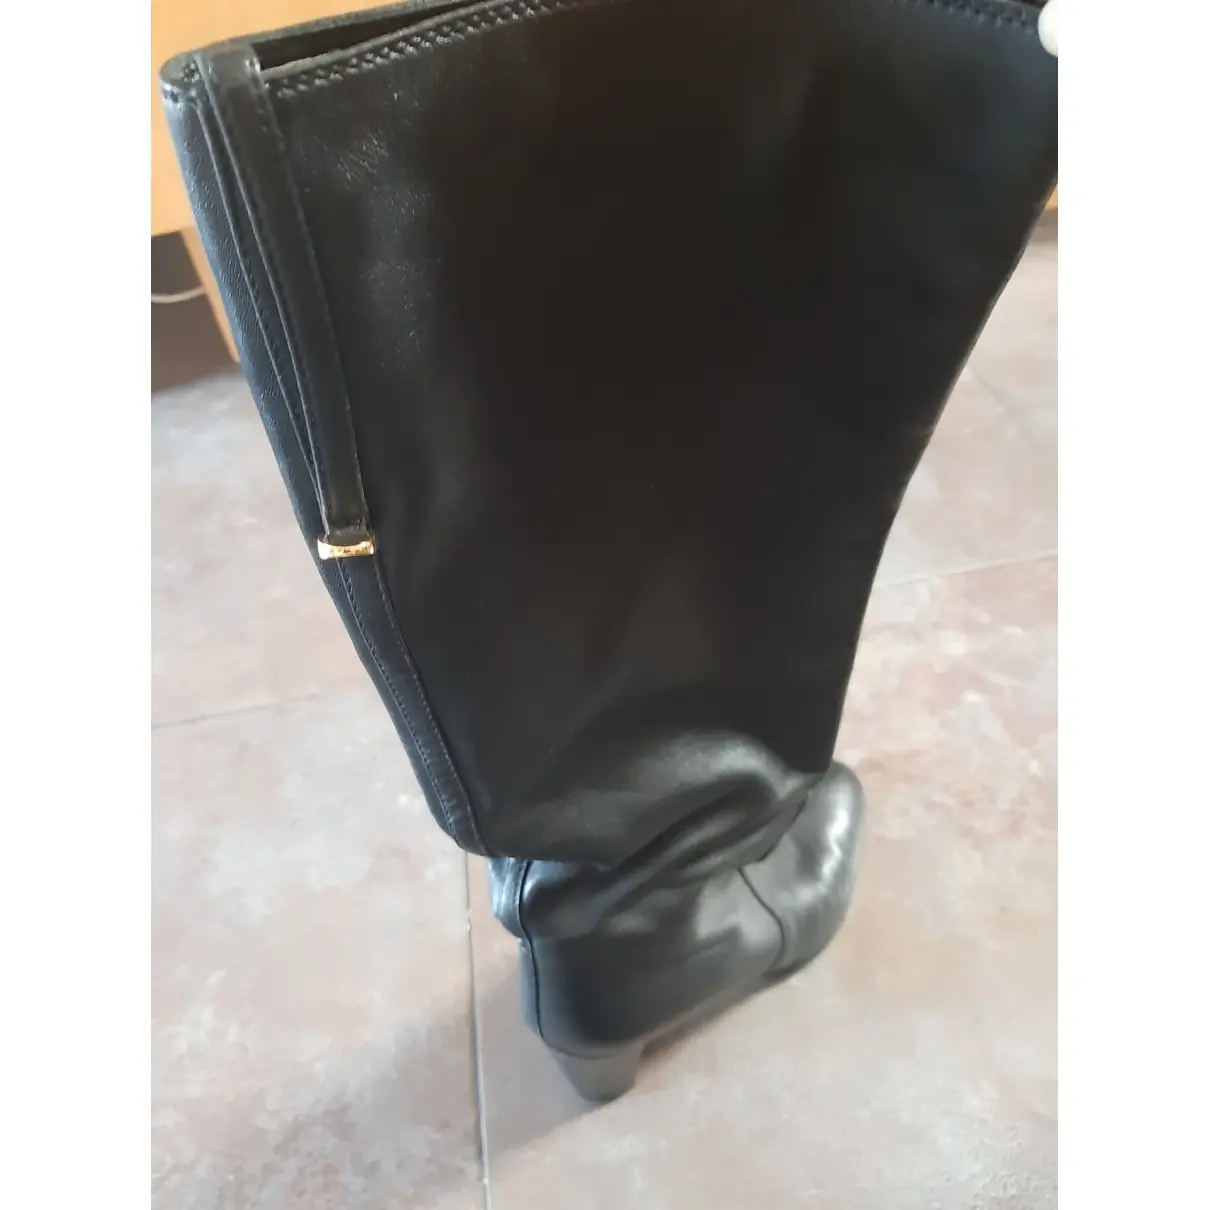 Sergio Rossi Leather boots for sale - Vintage